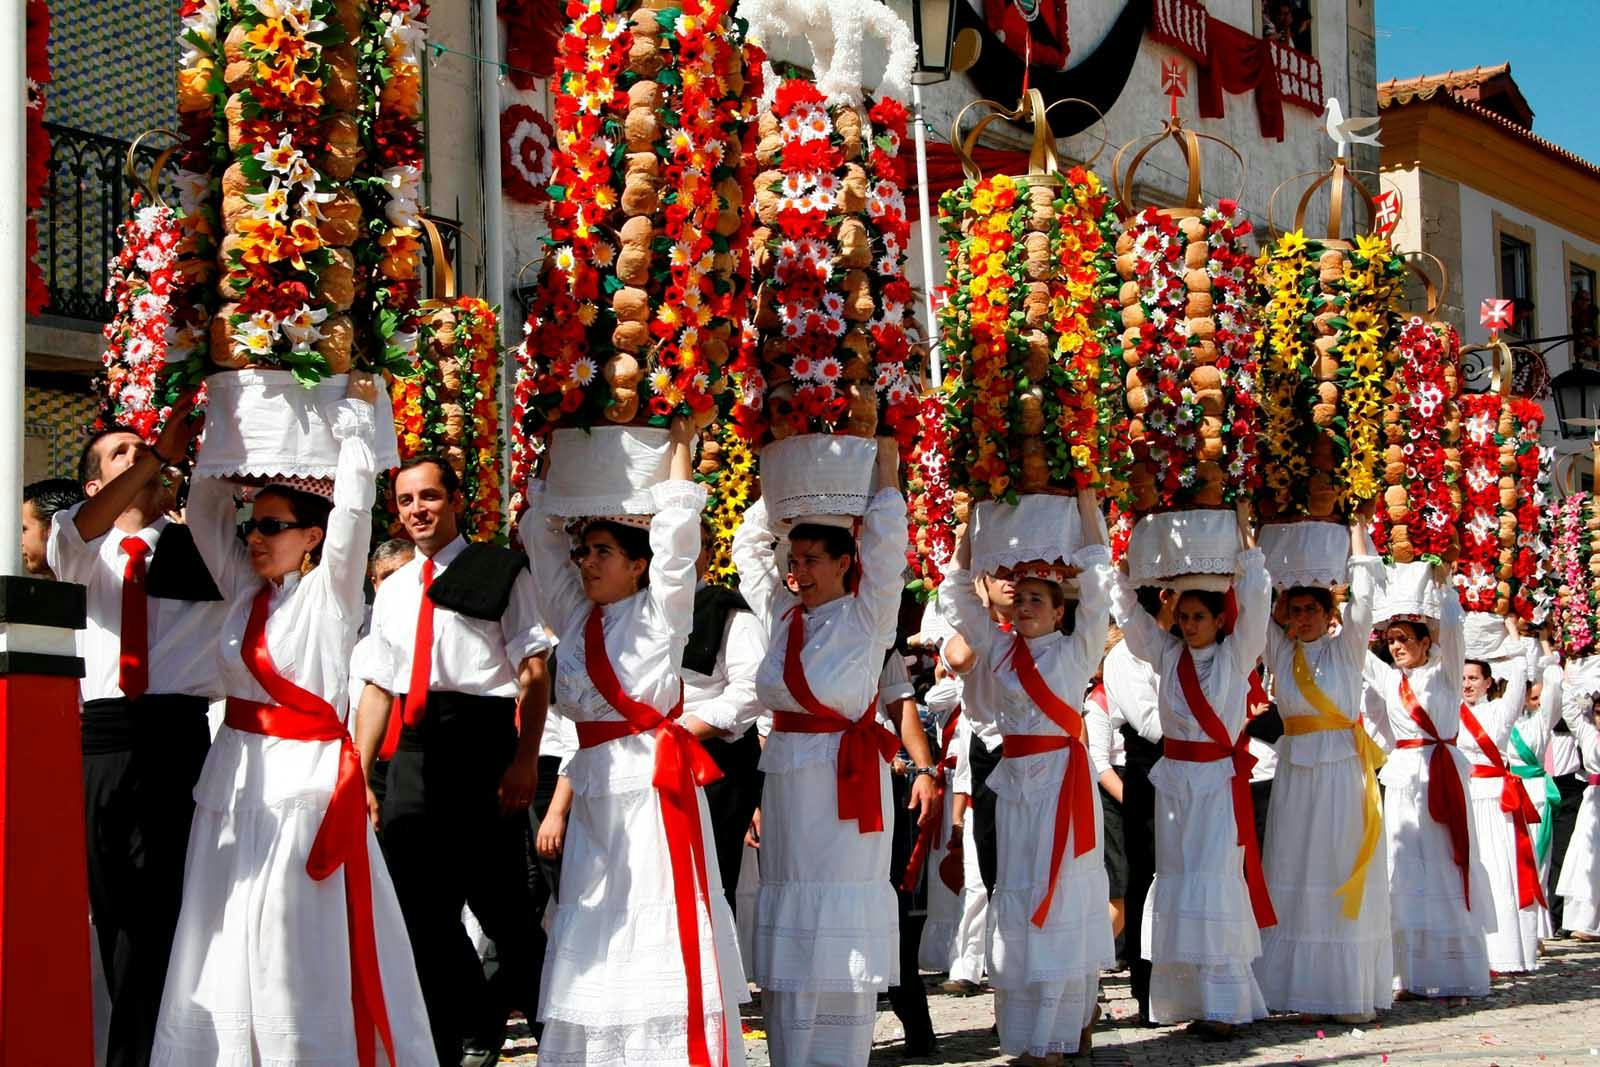 Elegant women parading with flower trays on their heads at the Festival of the Trays in Tomar, Portugal.